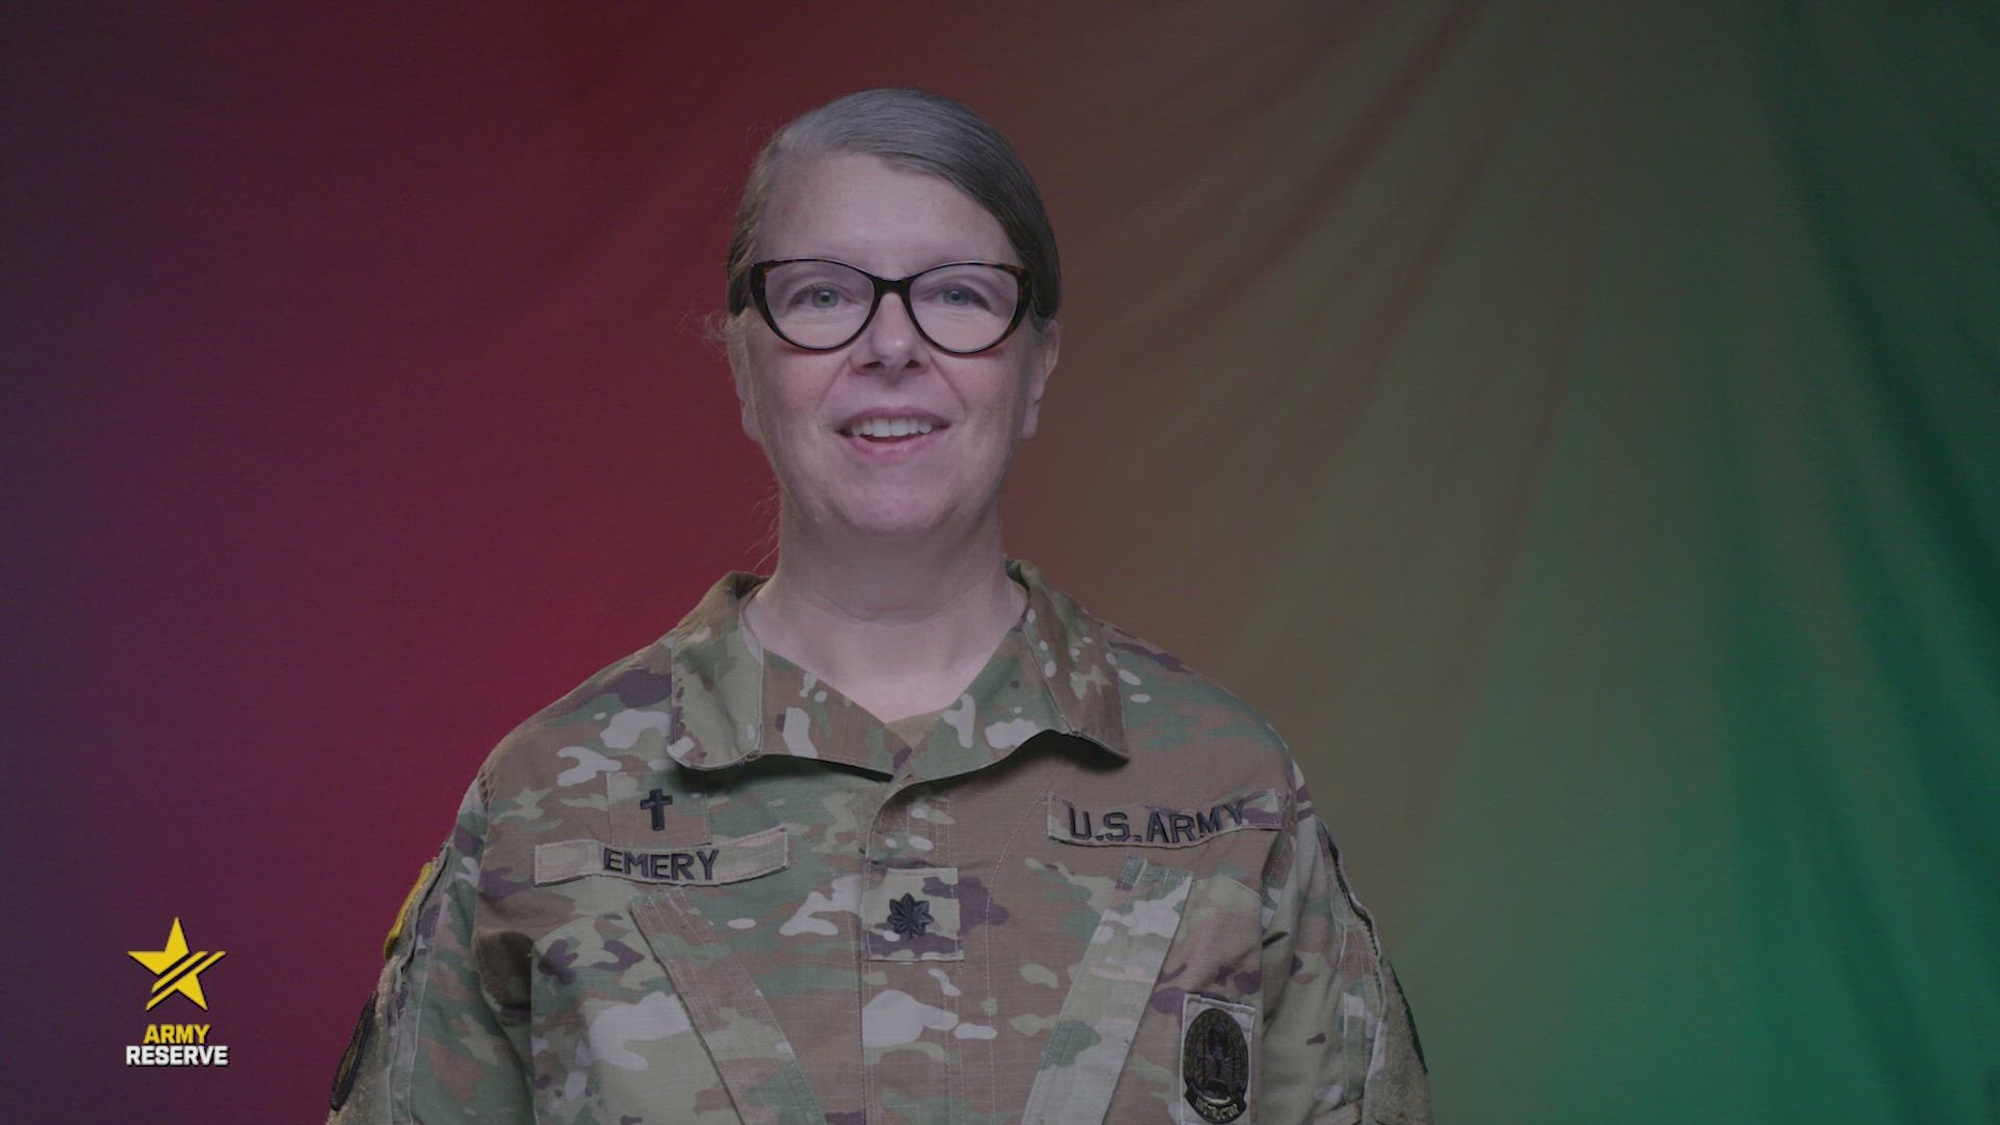 Chaplain (Lt. Col.) Virginia Emery, USARC Chief of Religious Support, talks about one's beliefs, identity, purpose and encourages all to take a pause from the hustle and bustle this holiday season.